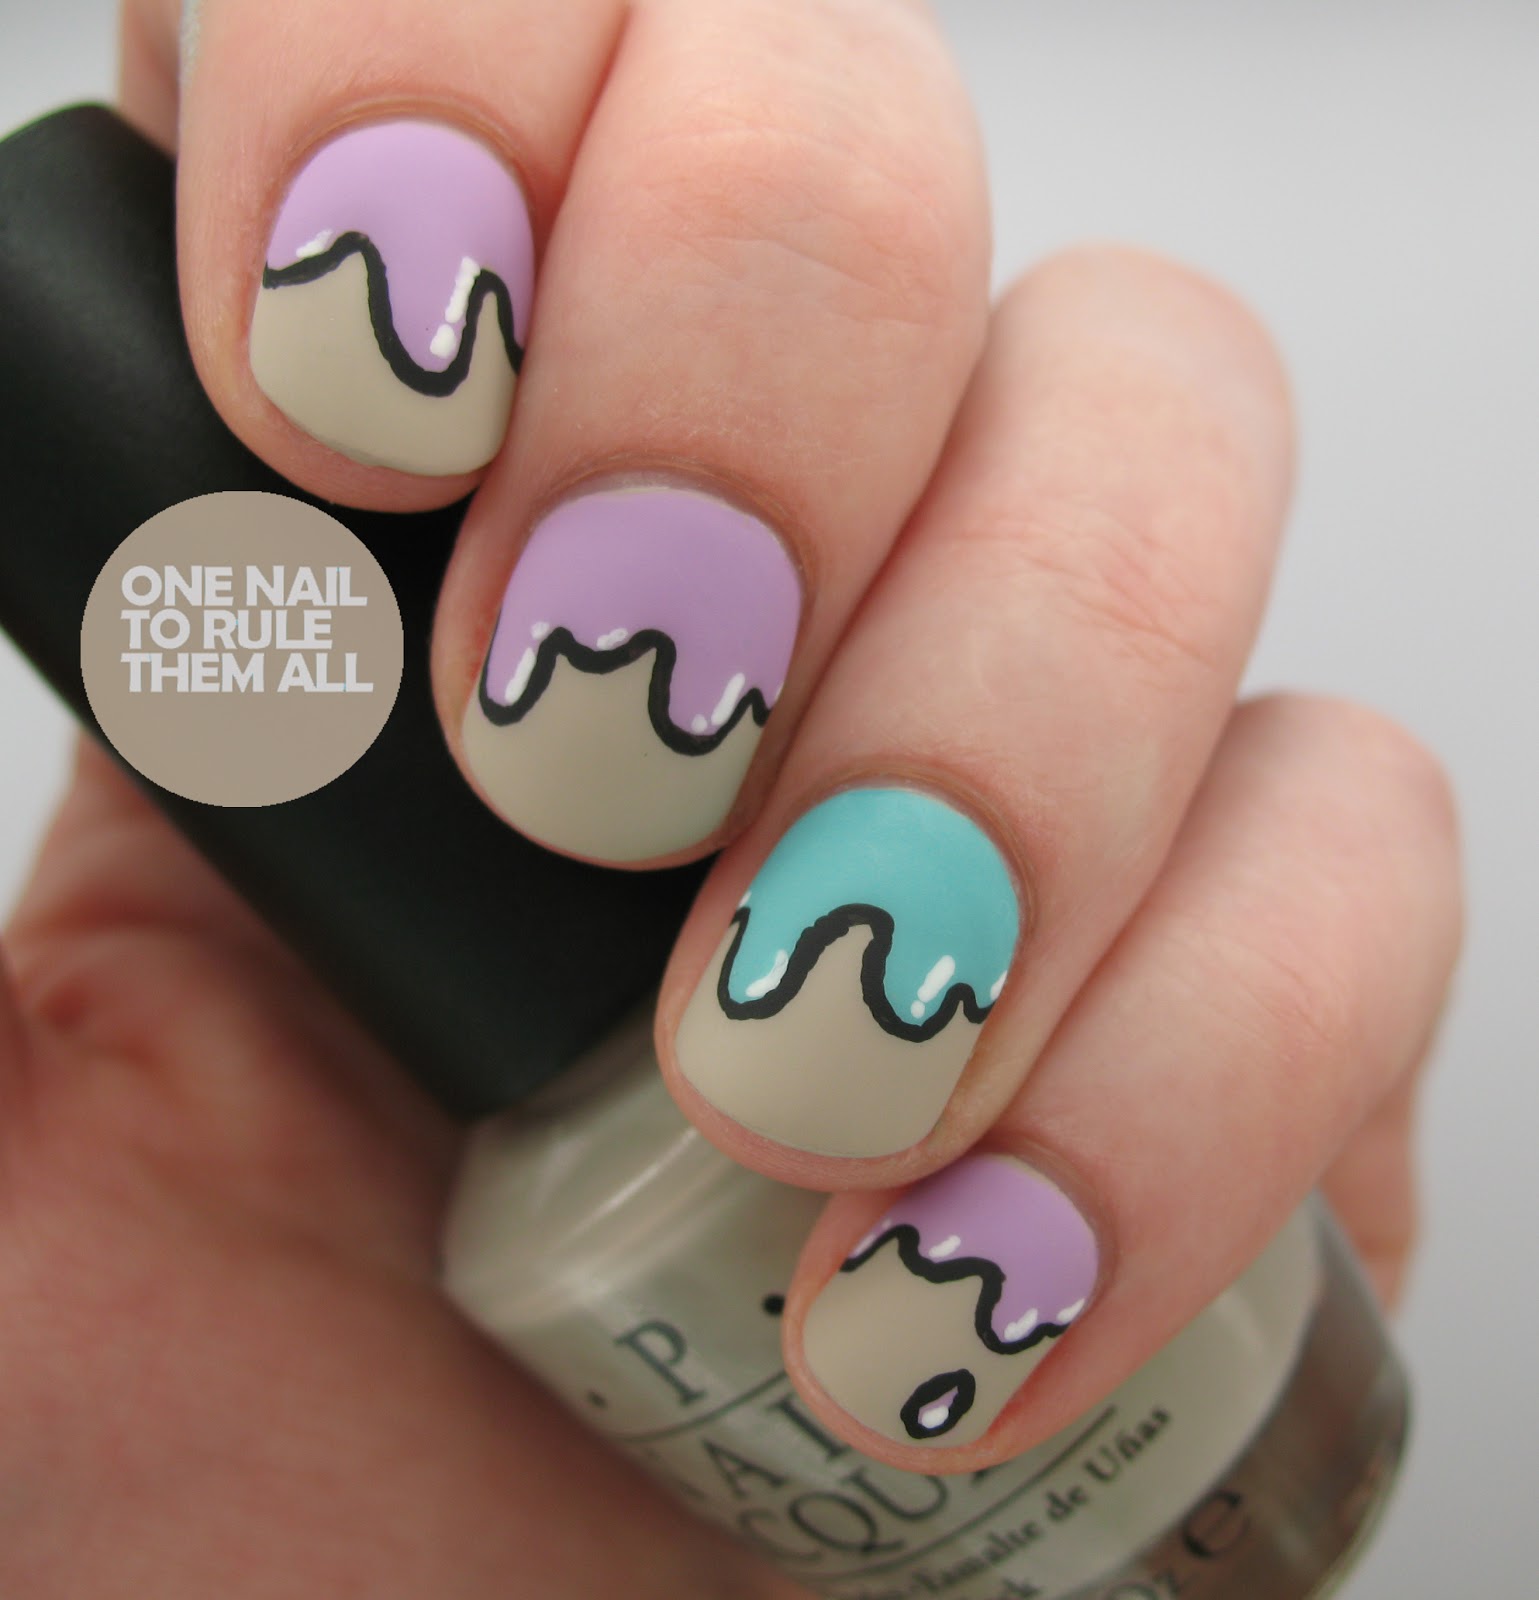 One Nail To Rule Them All: Nudey drips